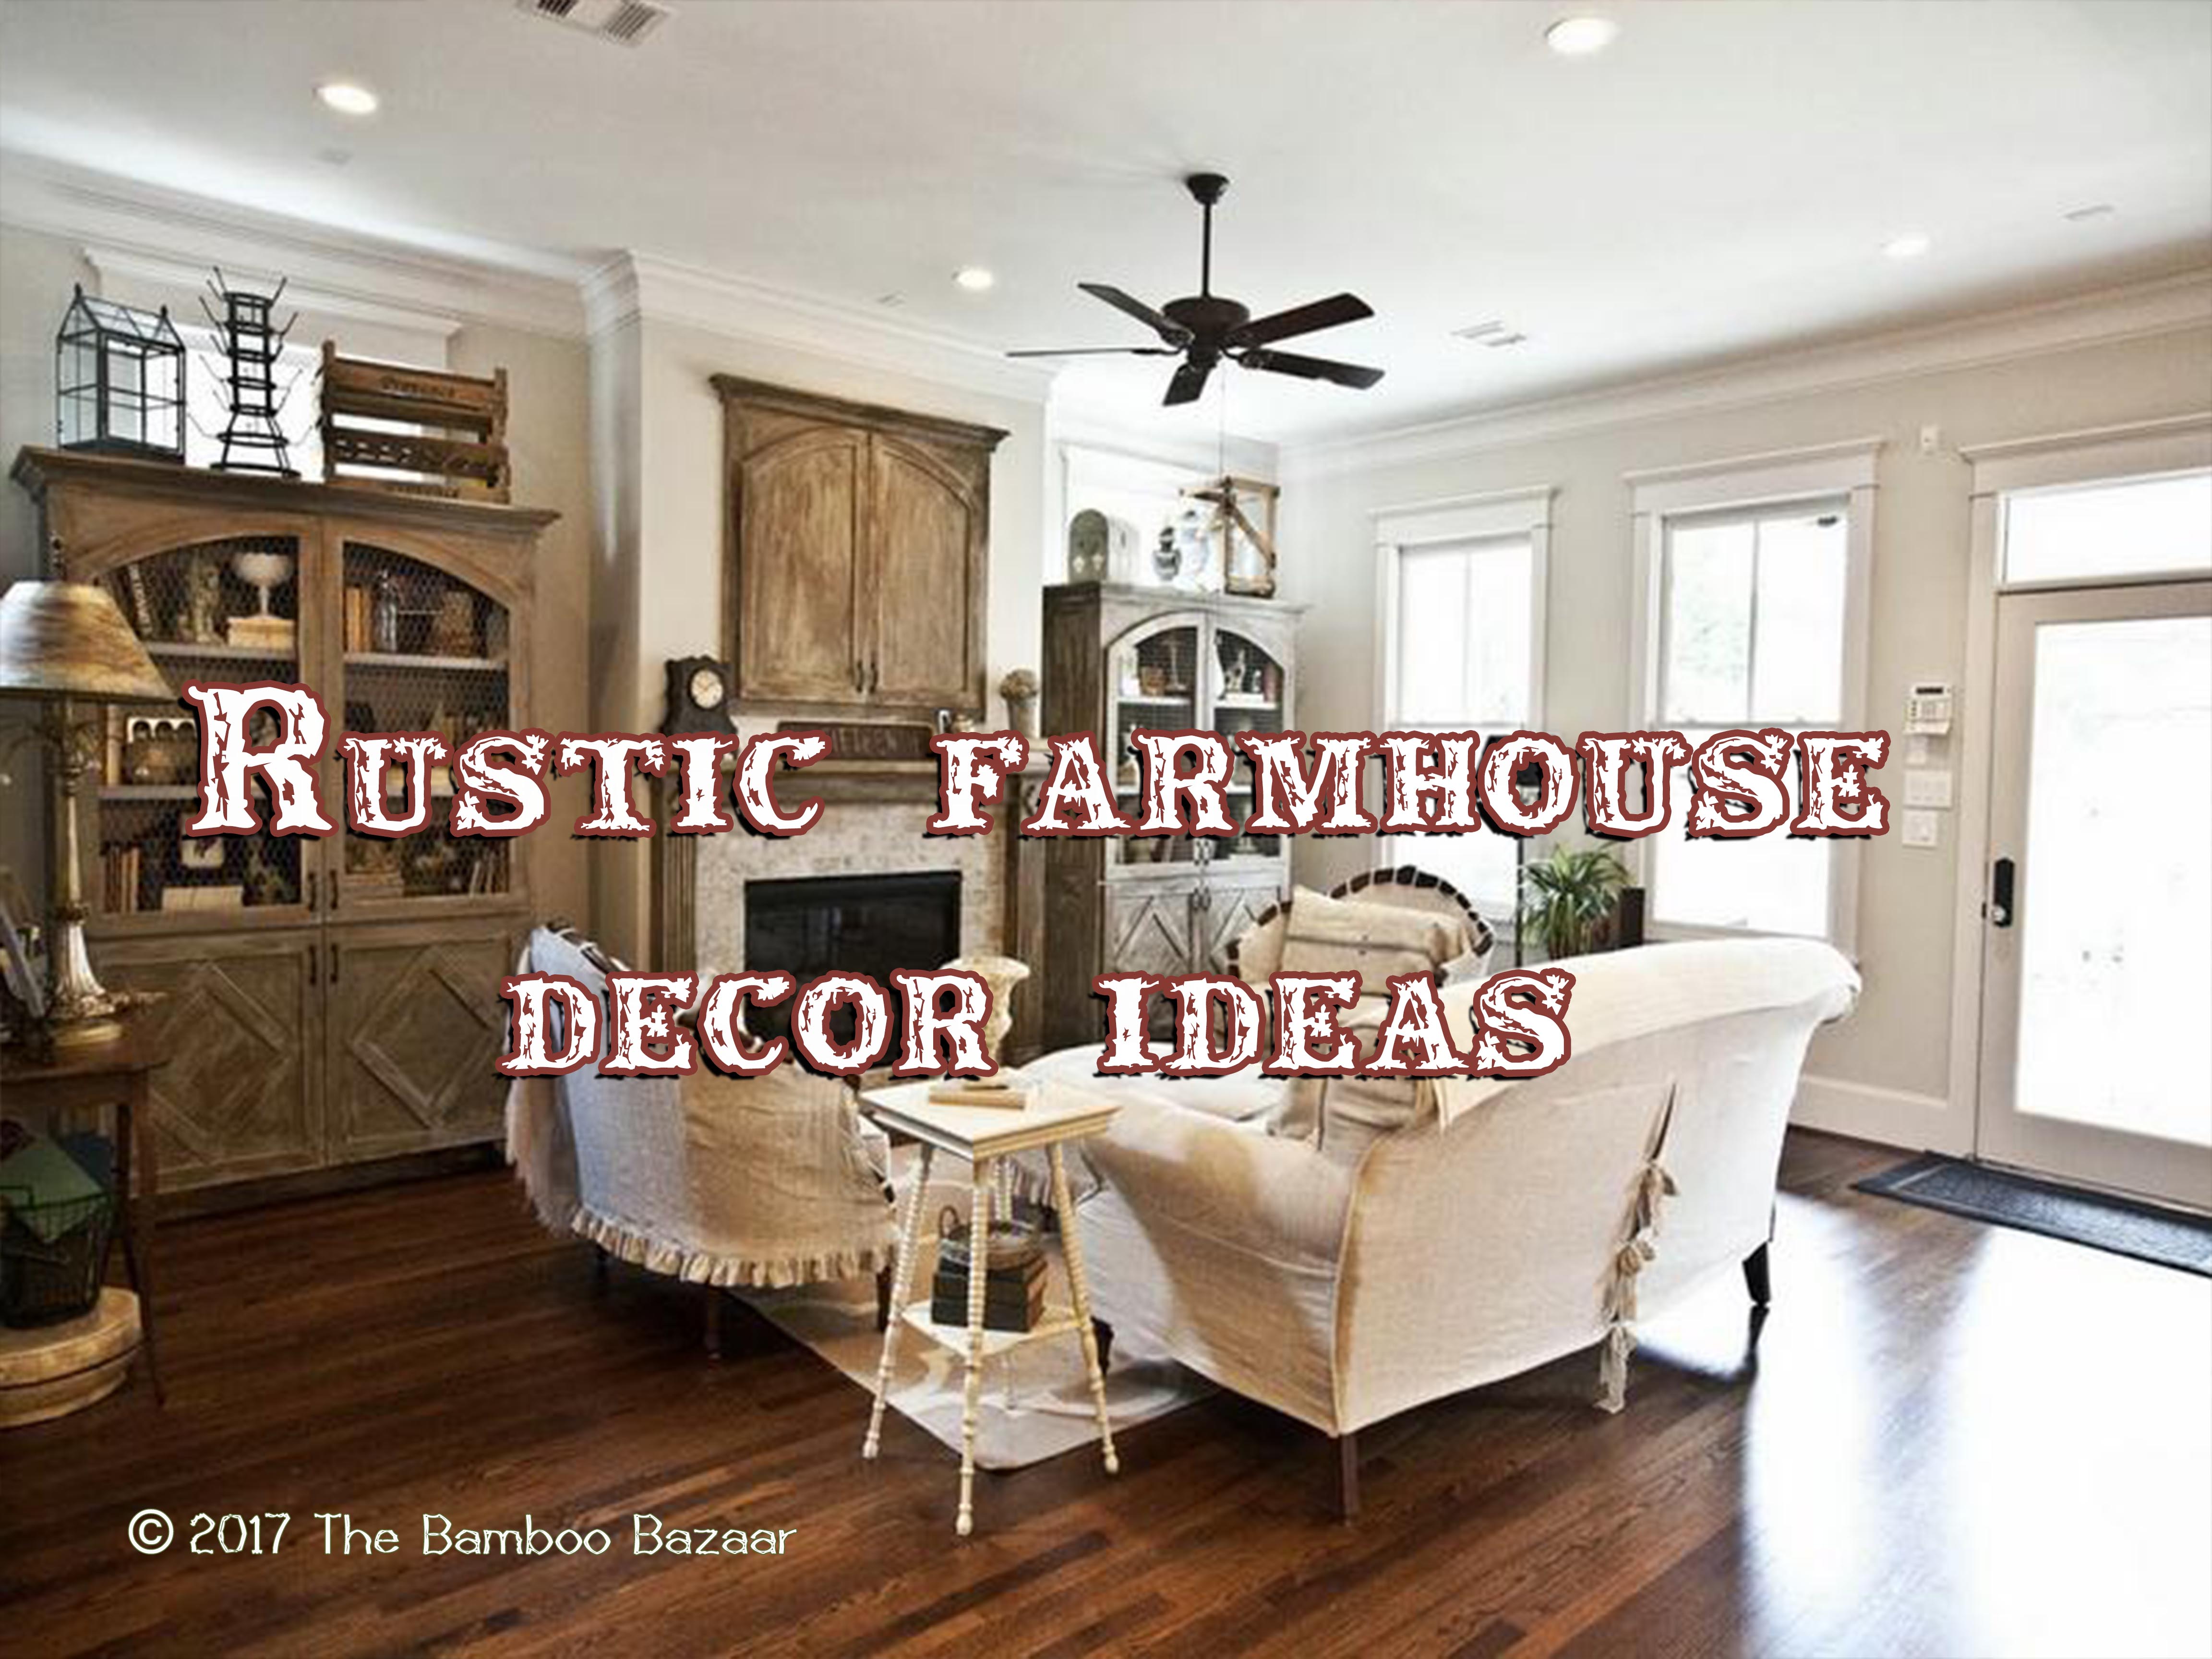 Rustic Farmhouse Dcor Ideas A Guide To This Natural And Warm Style